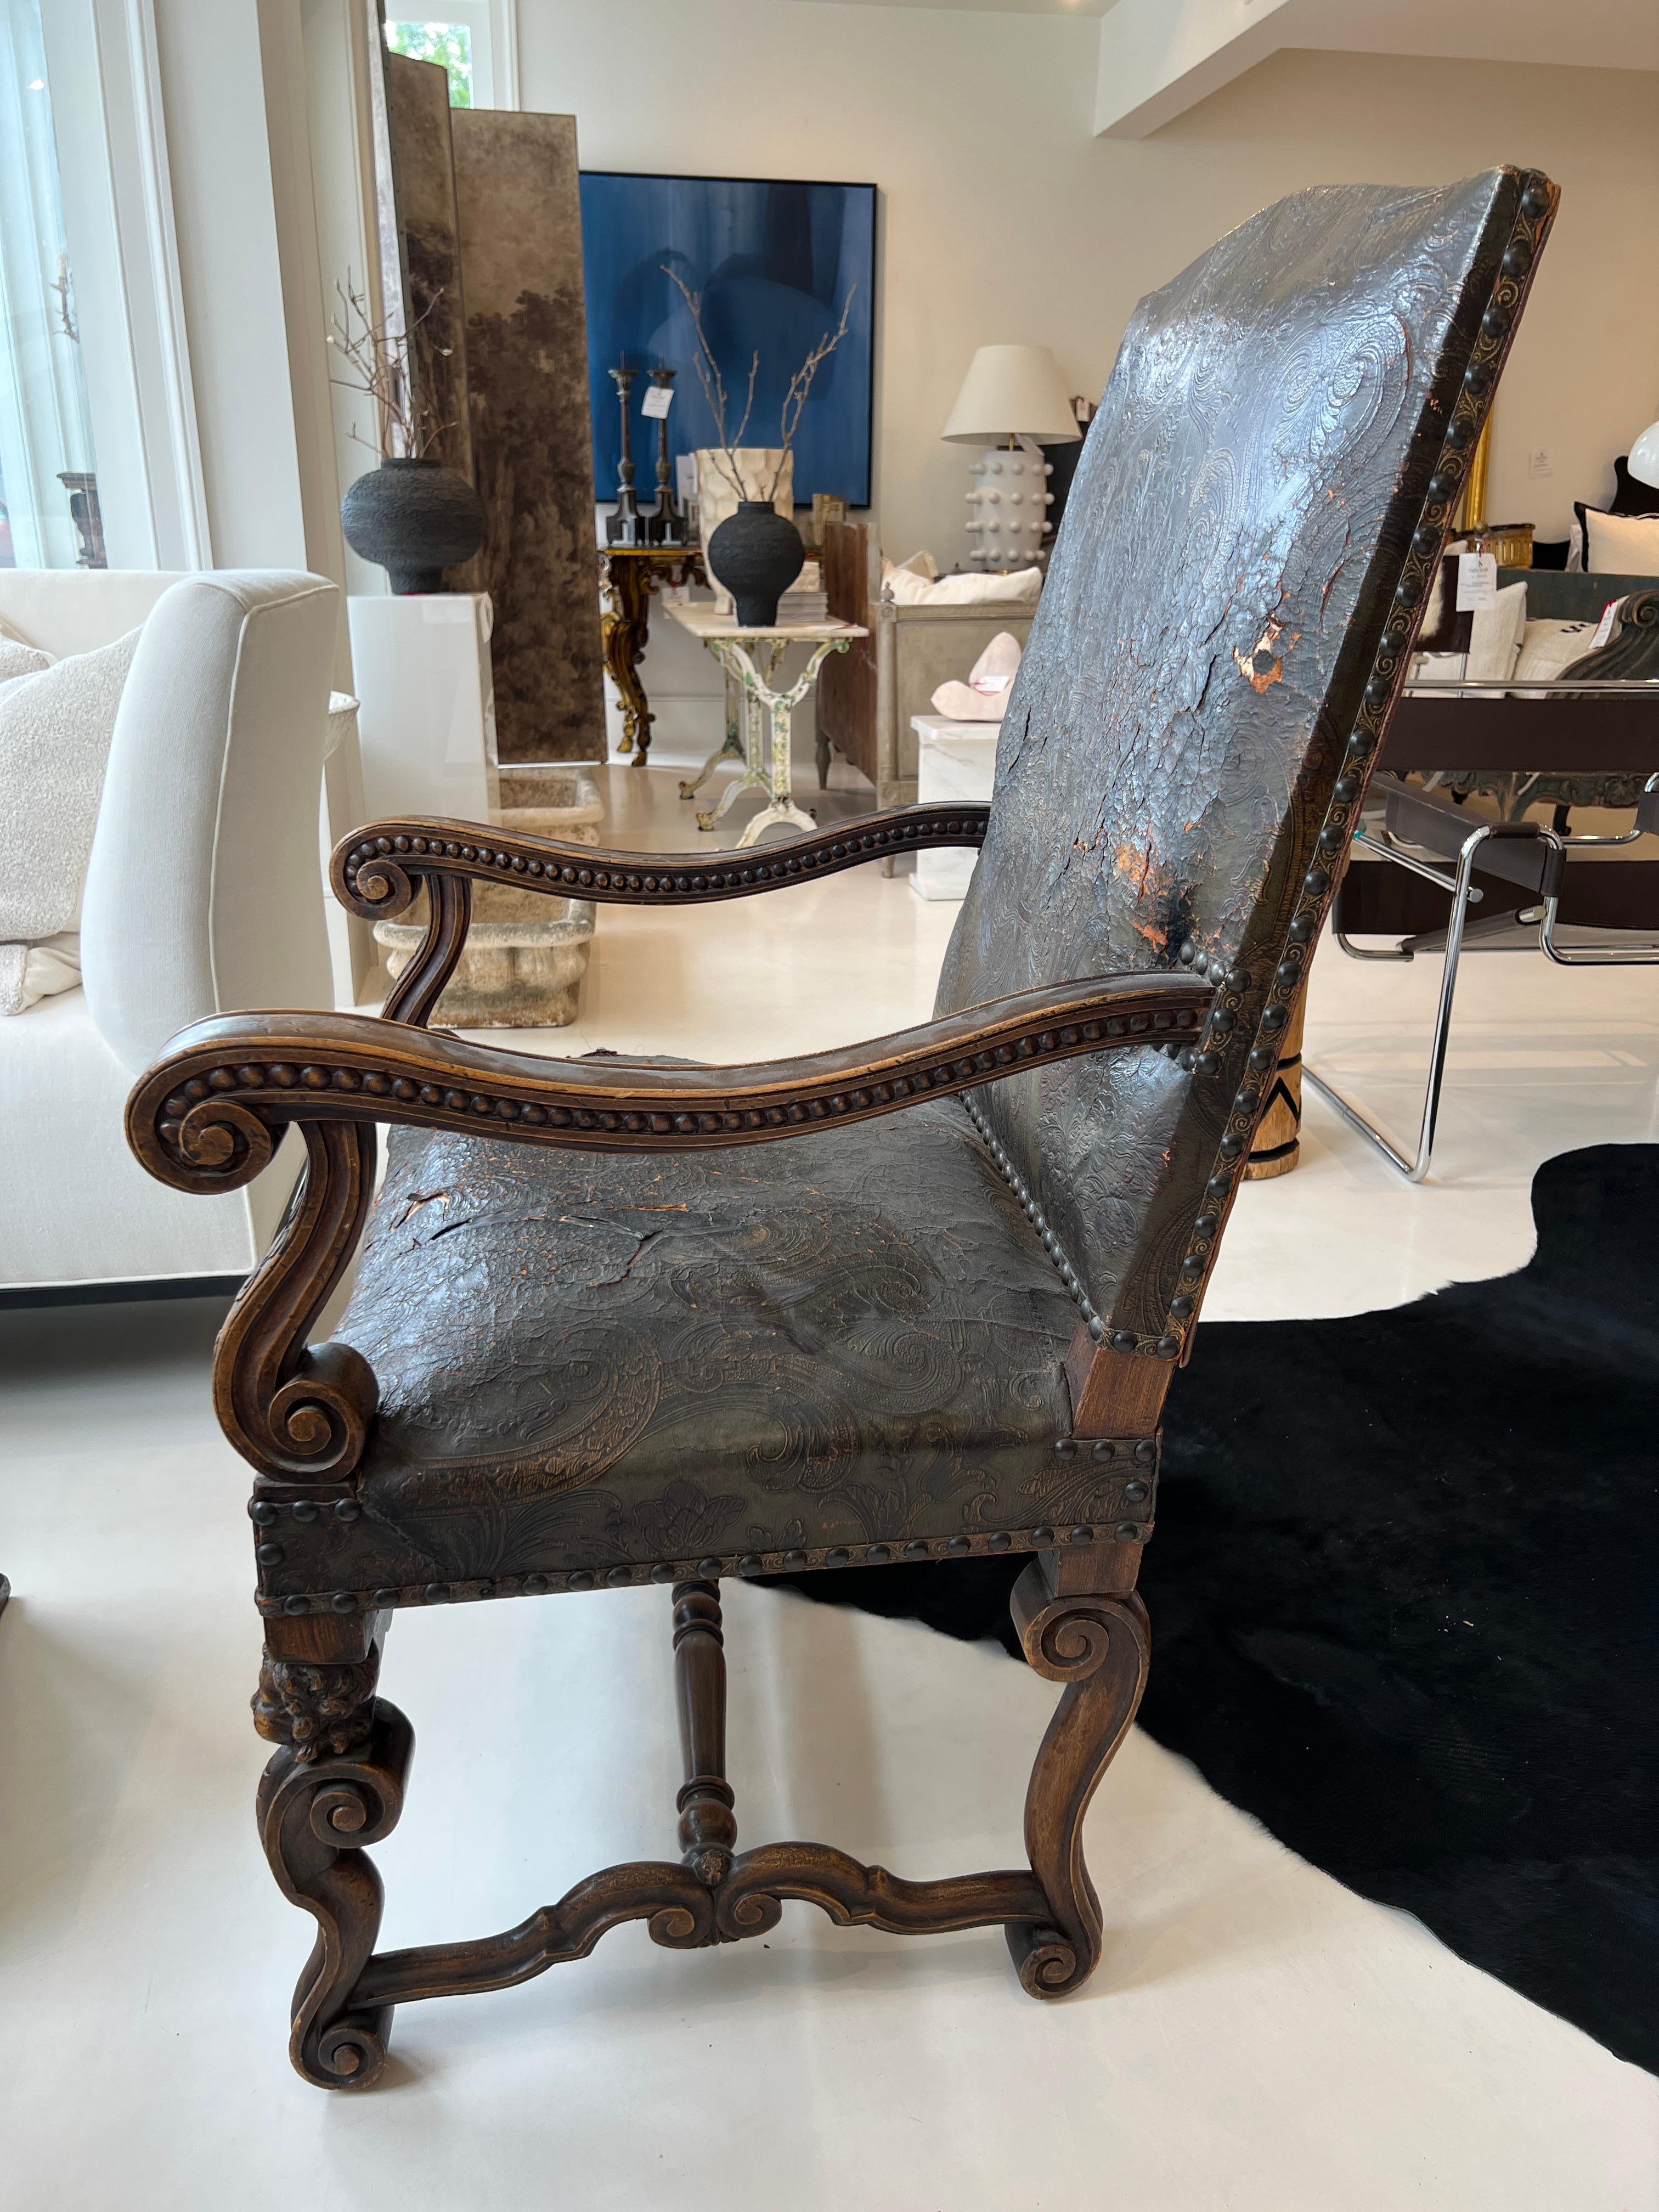 This large tooled leather and carved wood armchair has a lot to say. An imposing size is only the beginning. The winged angels blowing trumpets draw your eye towards the ornate detailing which is carved within the wood and embedded within the